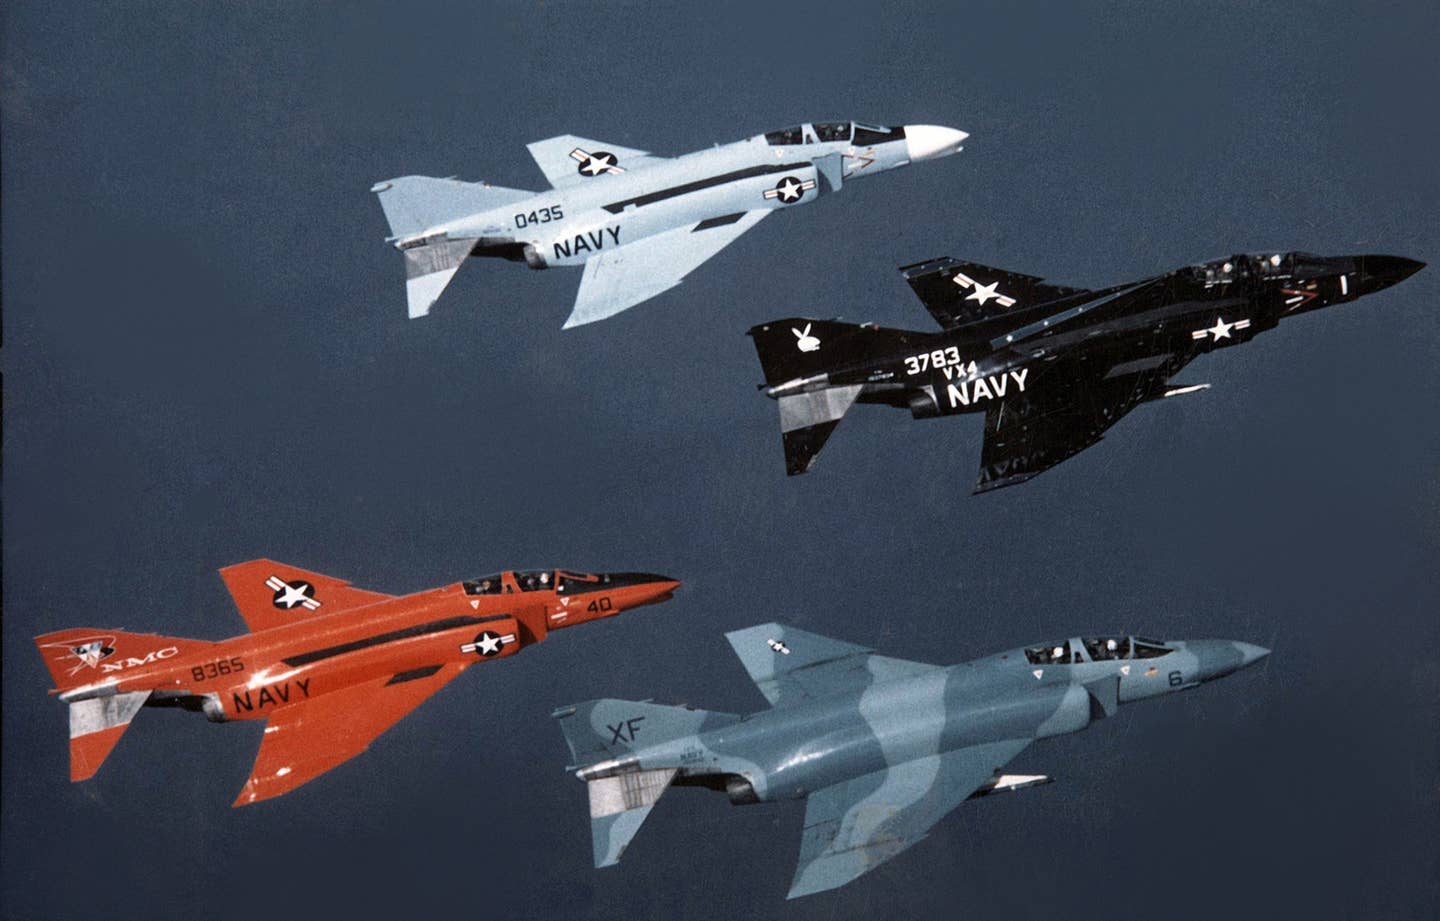 A formation of F-4s from VX-4 including a QF-4B, F-4B, and two F-4Js. <em>U.S. Navy National Museum of Aviation</em>